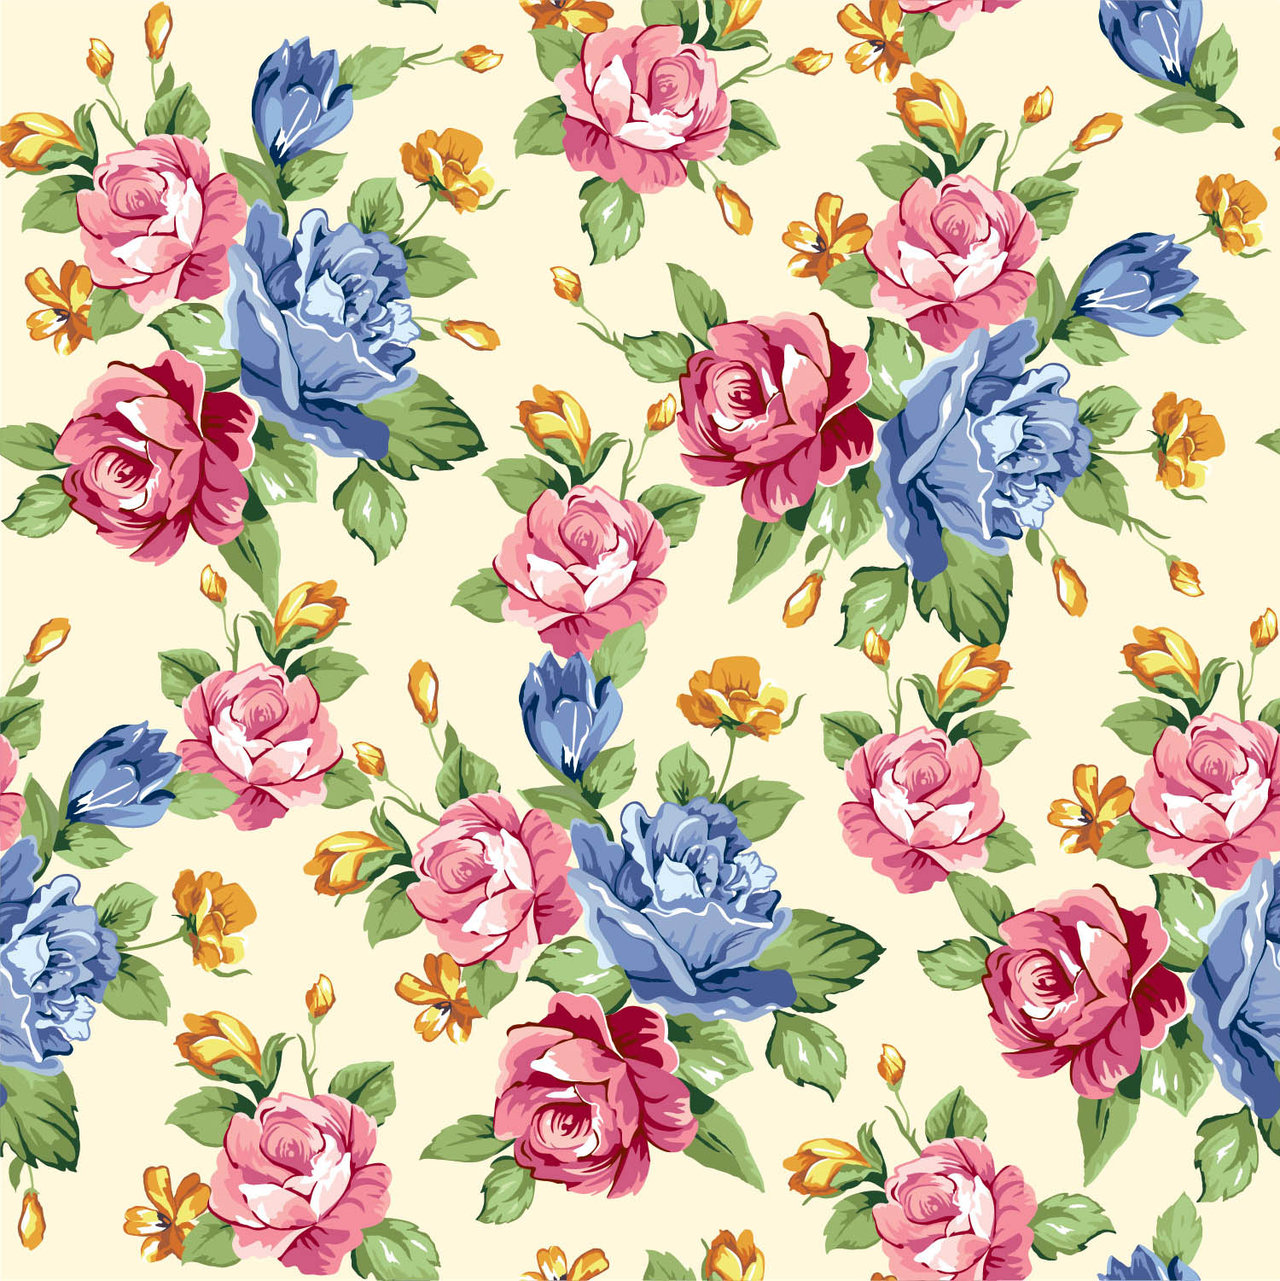 Free download Seamless Floral Print 25 by DonCabanza [1280x1281] for your Desktop, Mobile & Tablet. Explore Flower Print Wallpaper Roses. Rose Flowers Wallpaper Free Download, Roses Wallpaper for Desktop